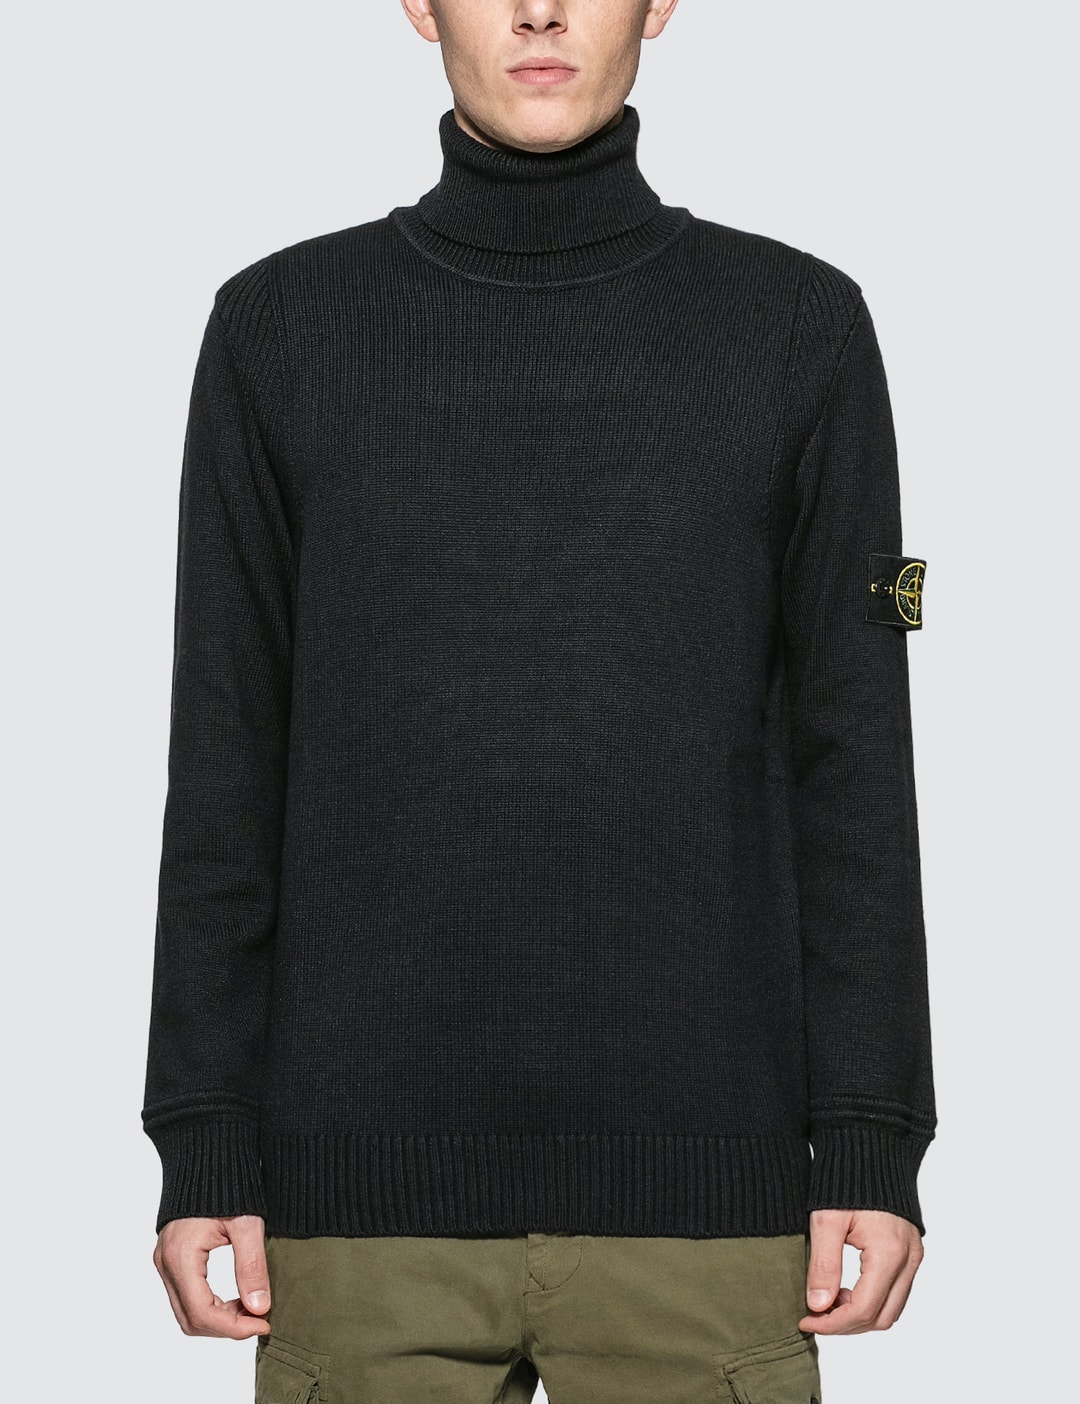 verkopen krullen enkel en alleen Stone Island - Turtle Neck Knitted Sweater | HBX - Globally Curated Fashion  and Lifestyle by Hypebeast